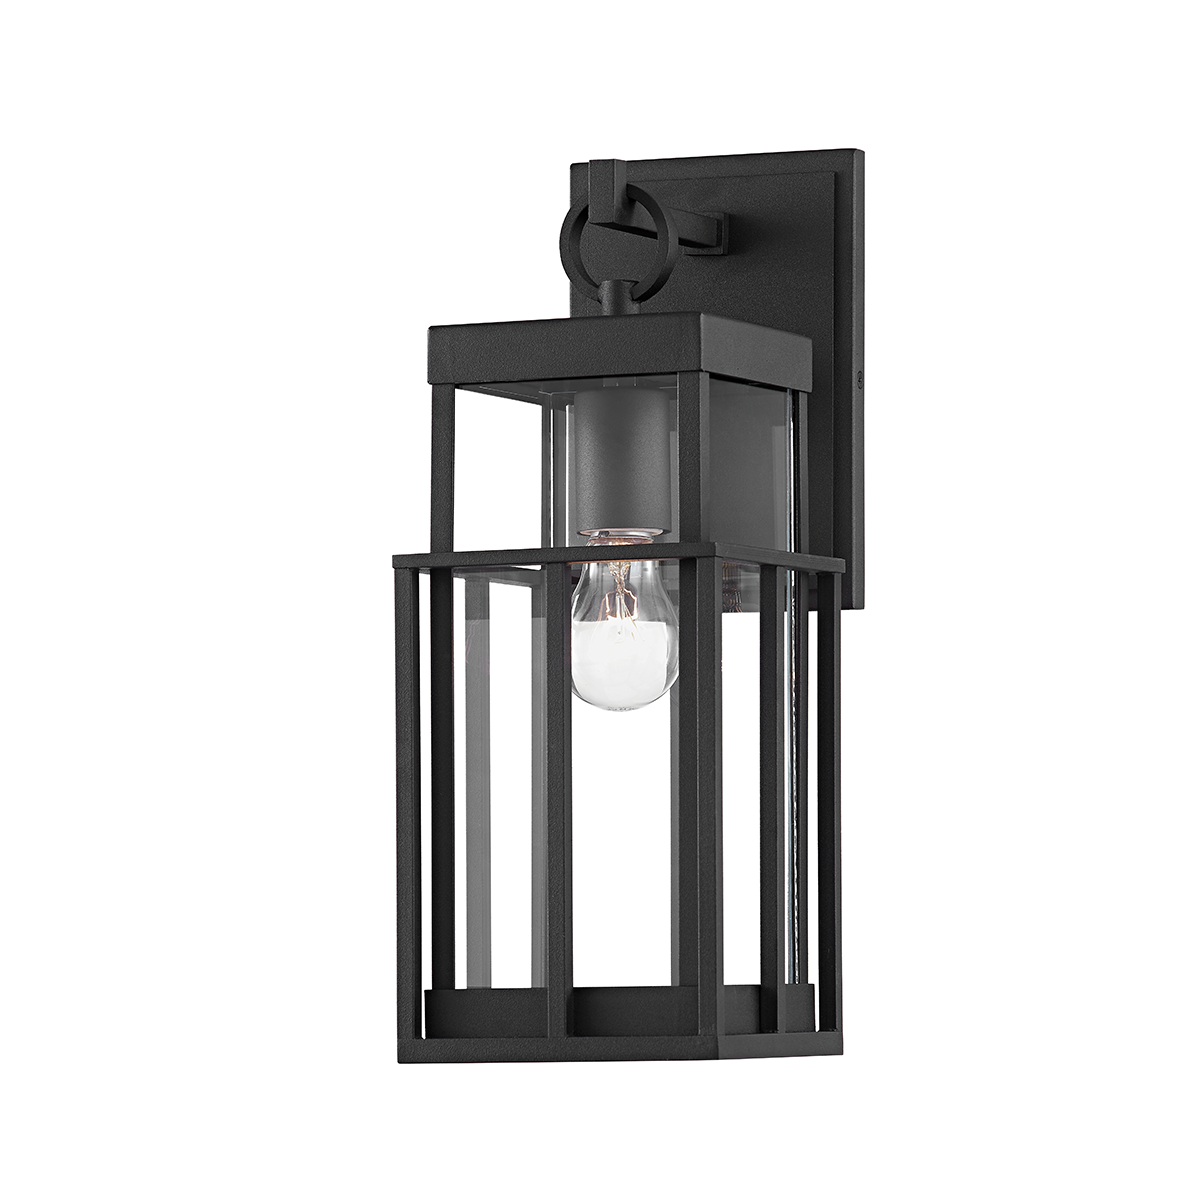 Troy Lighting 1 LIGHT SMALL EXTERIOR WALL SCONCE B6481